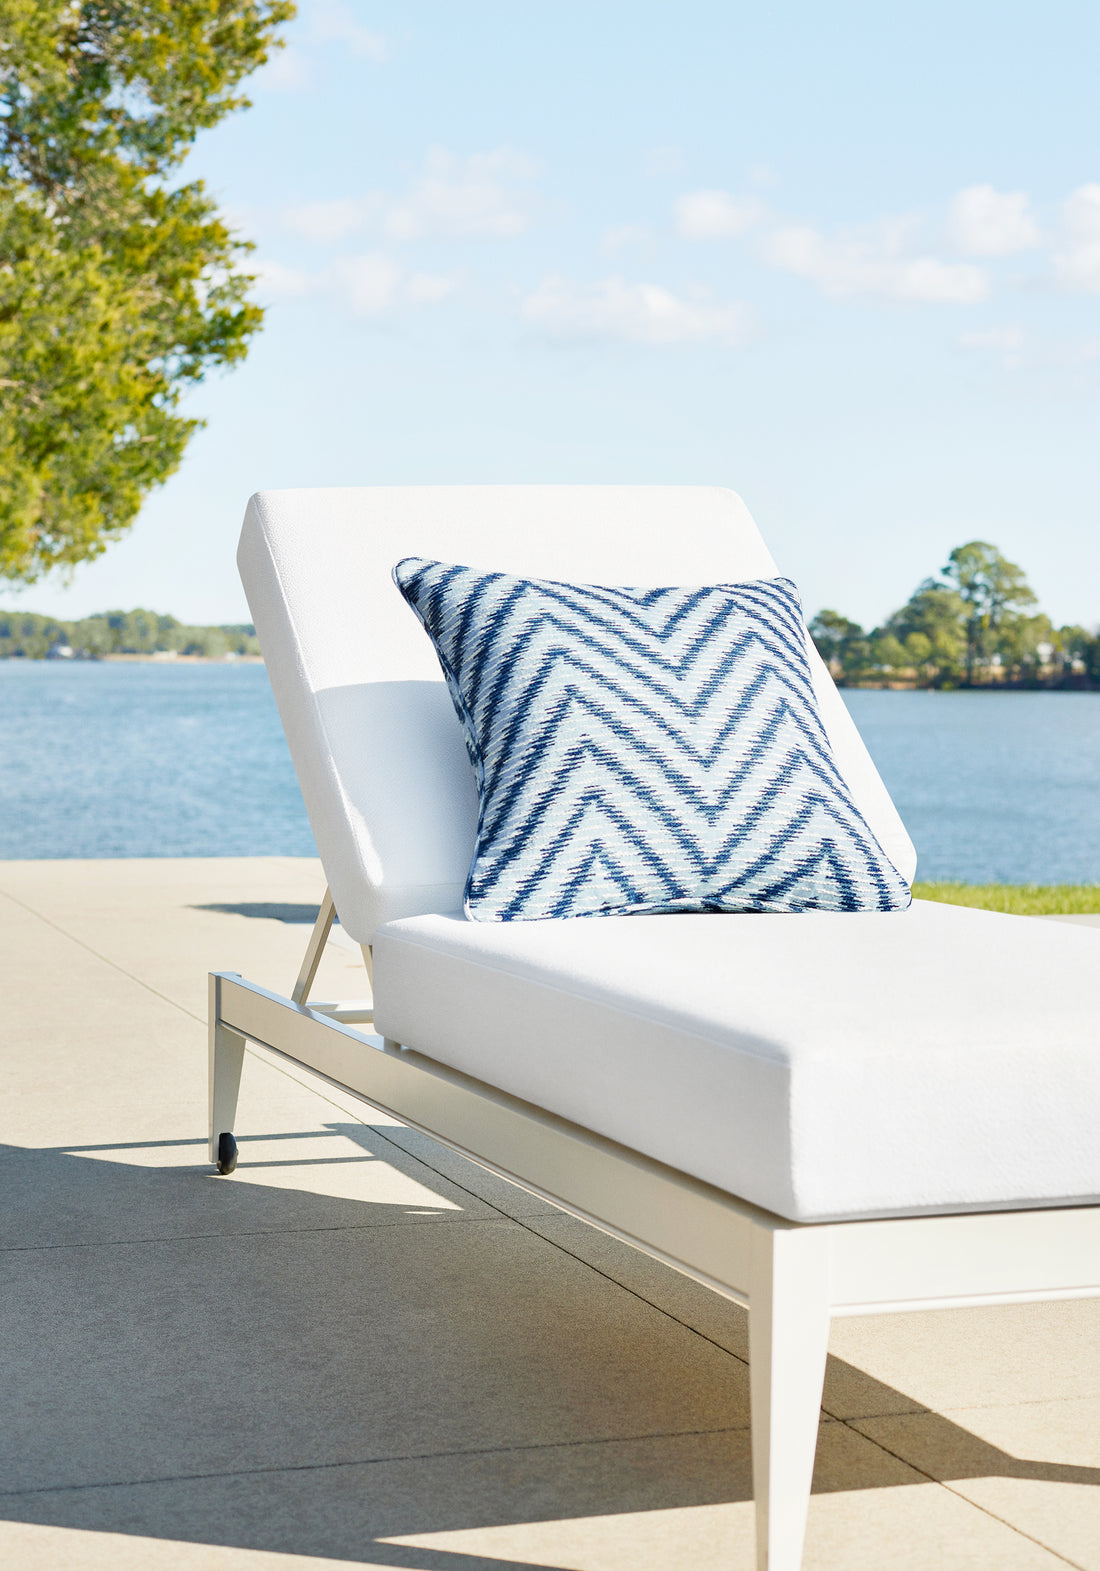 Pillow featuring Aliso fabric in denim color - pattern number W8820 - by Thibaut in the Haven collection